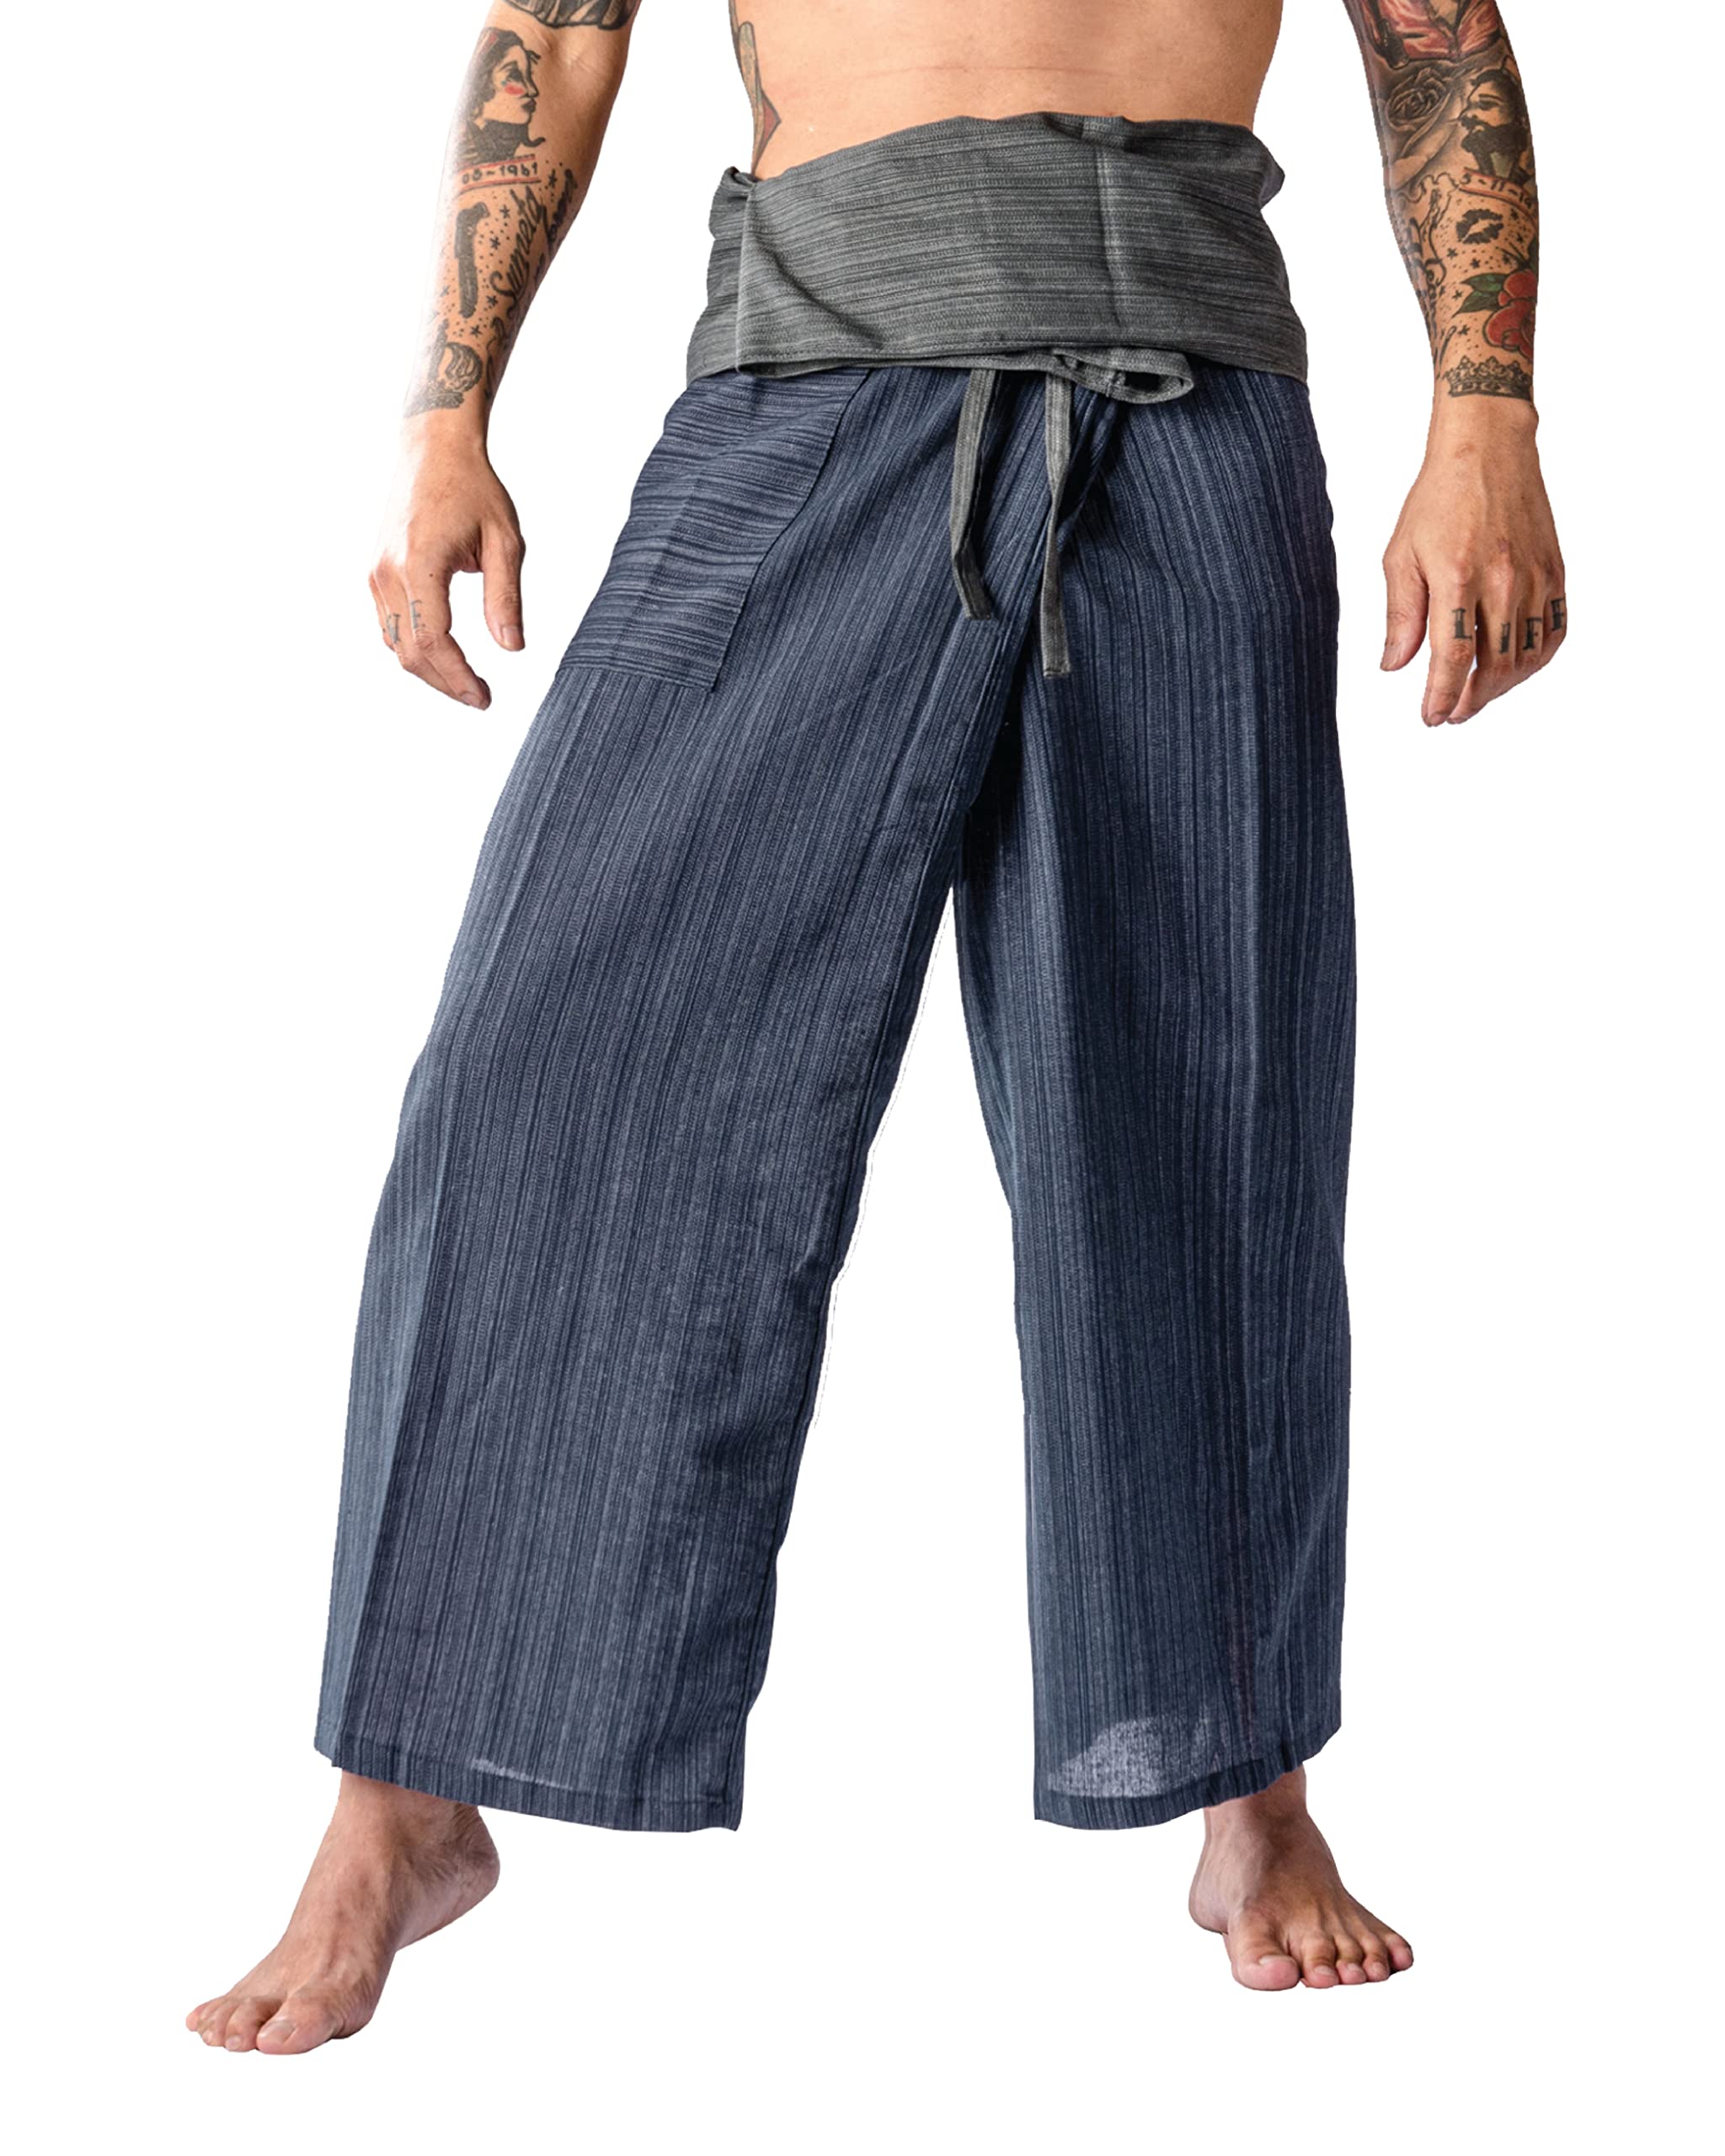 Buy Men's Martial Arts Pants Kung Fu Cotton Trousers (M, Black) at Amazon.in